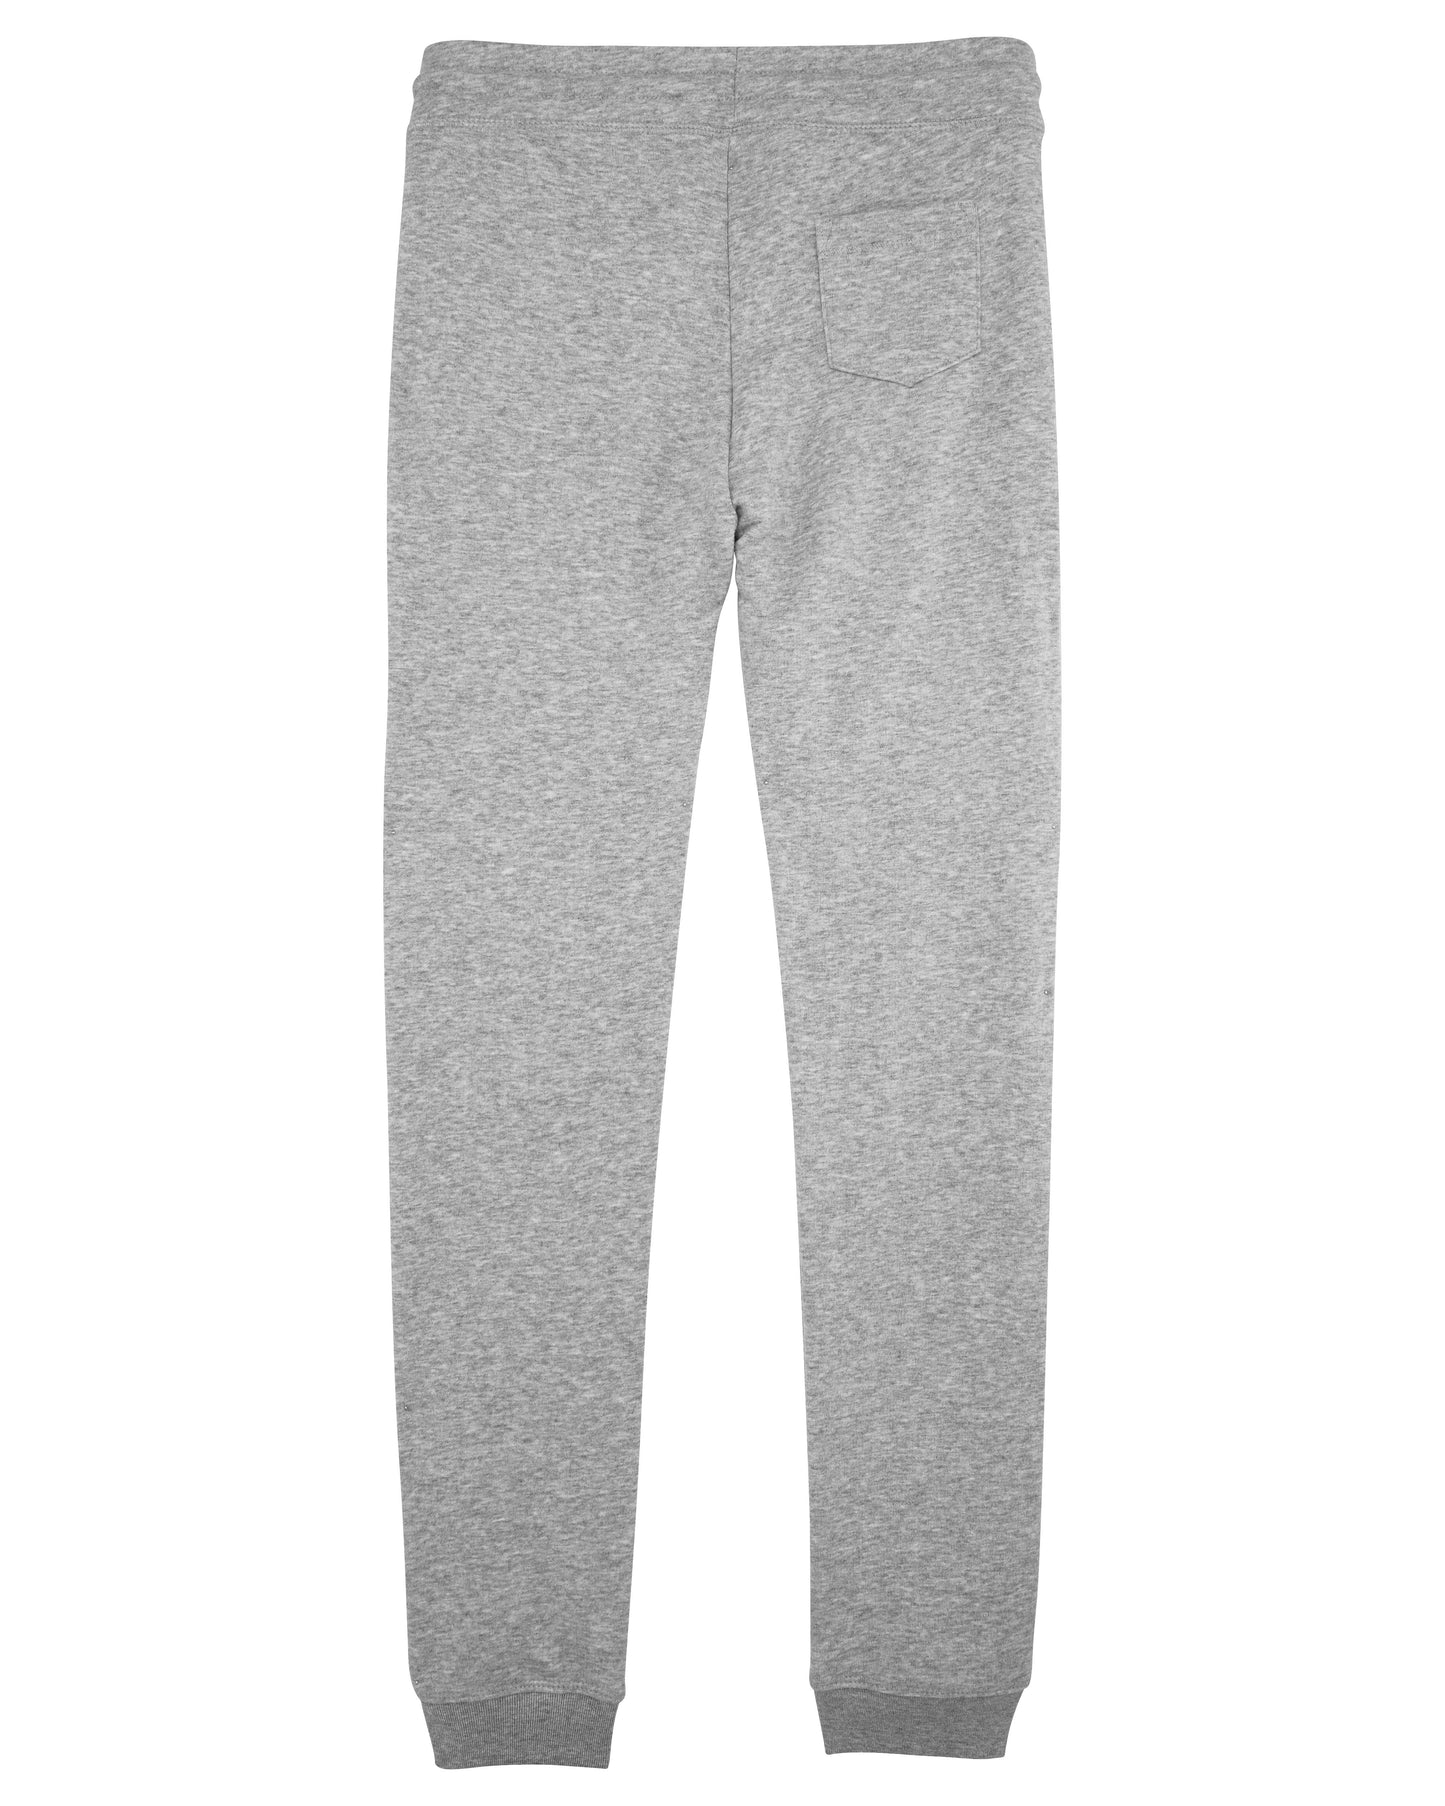 PIERRE BERGER - Women's jogging pants 100% recycled stick